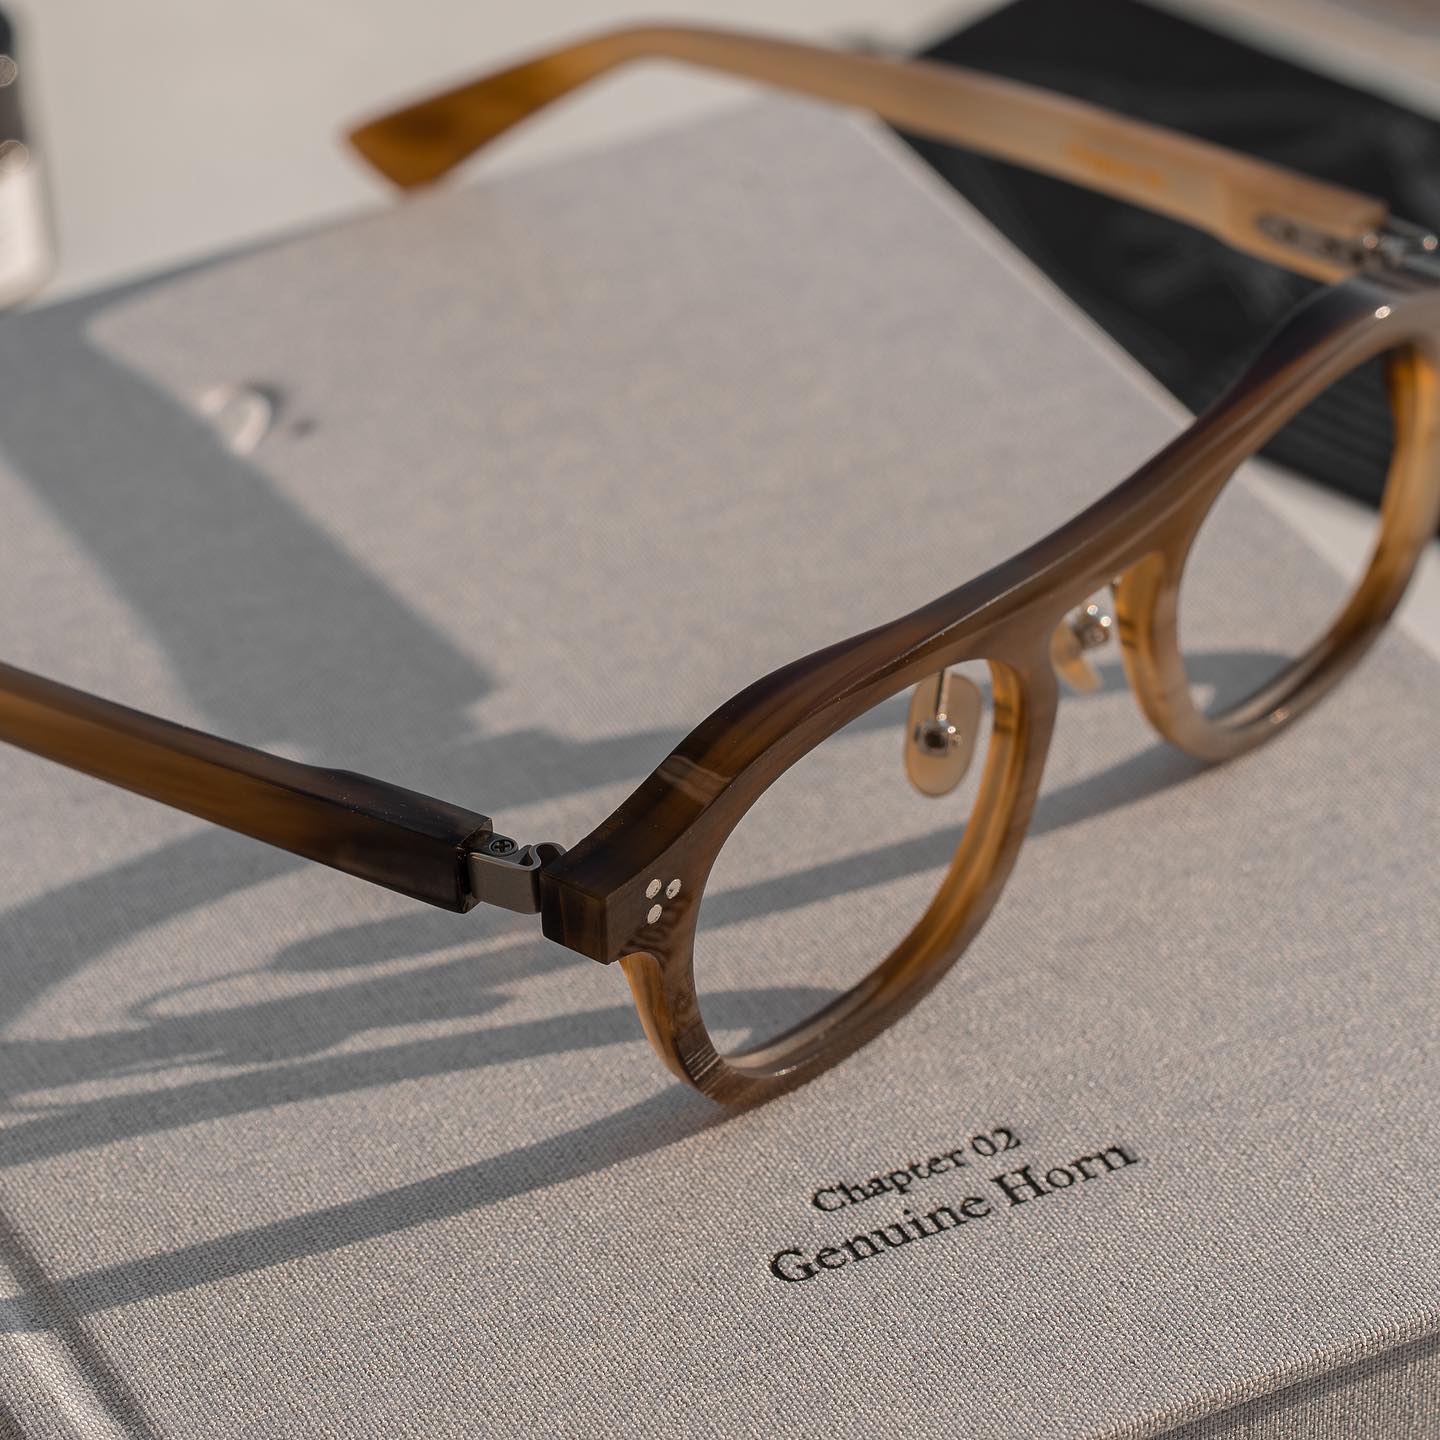 Where to buy independent designer brands prescription glasses and sunglasses in seoul